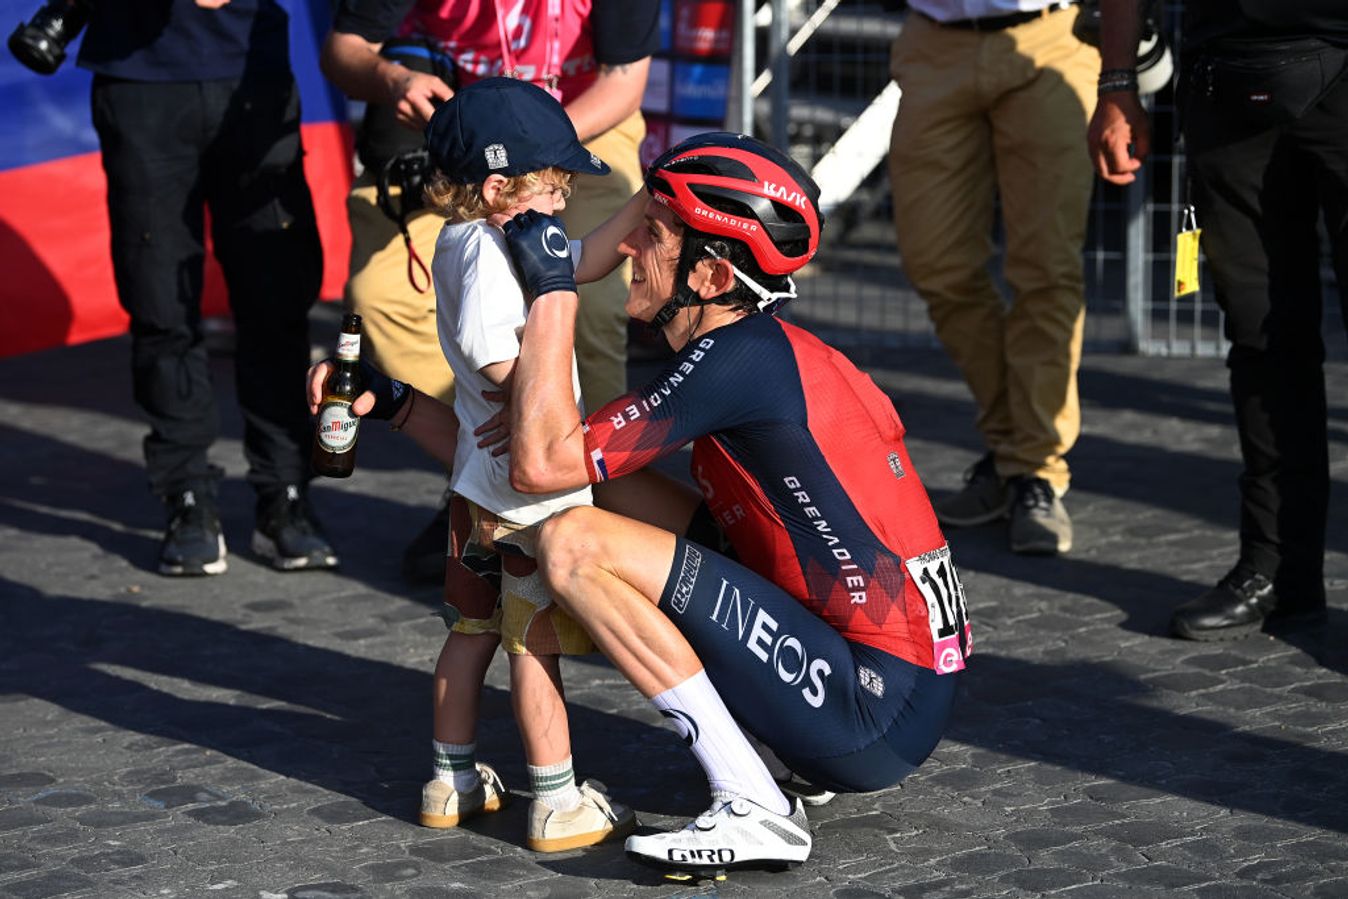 Geraint Thomas' son visited him during the Giro d'Italia this year